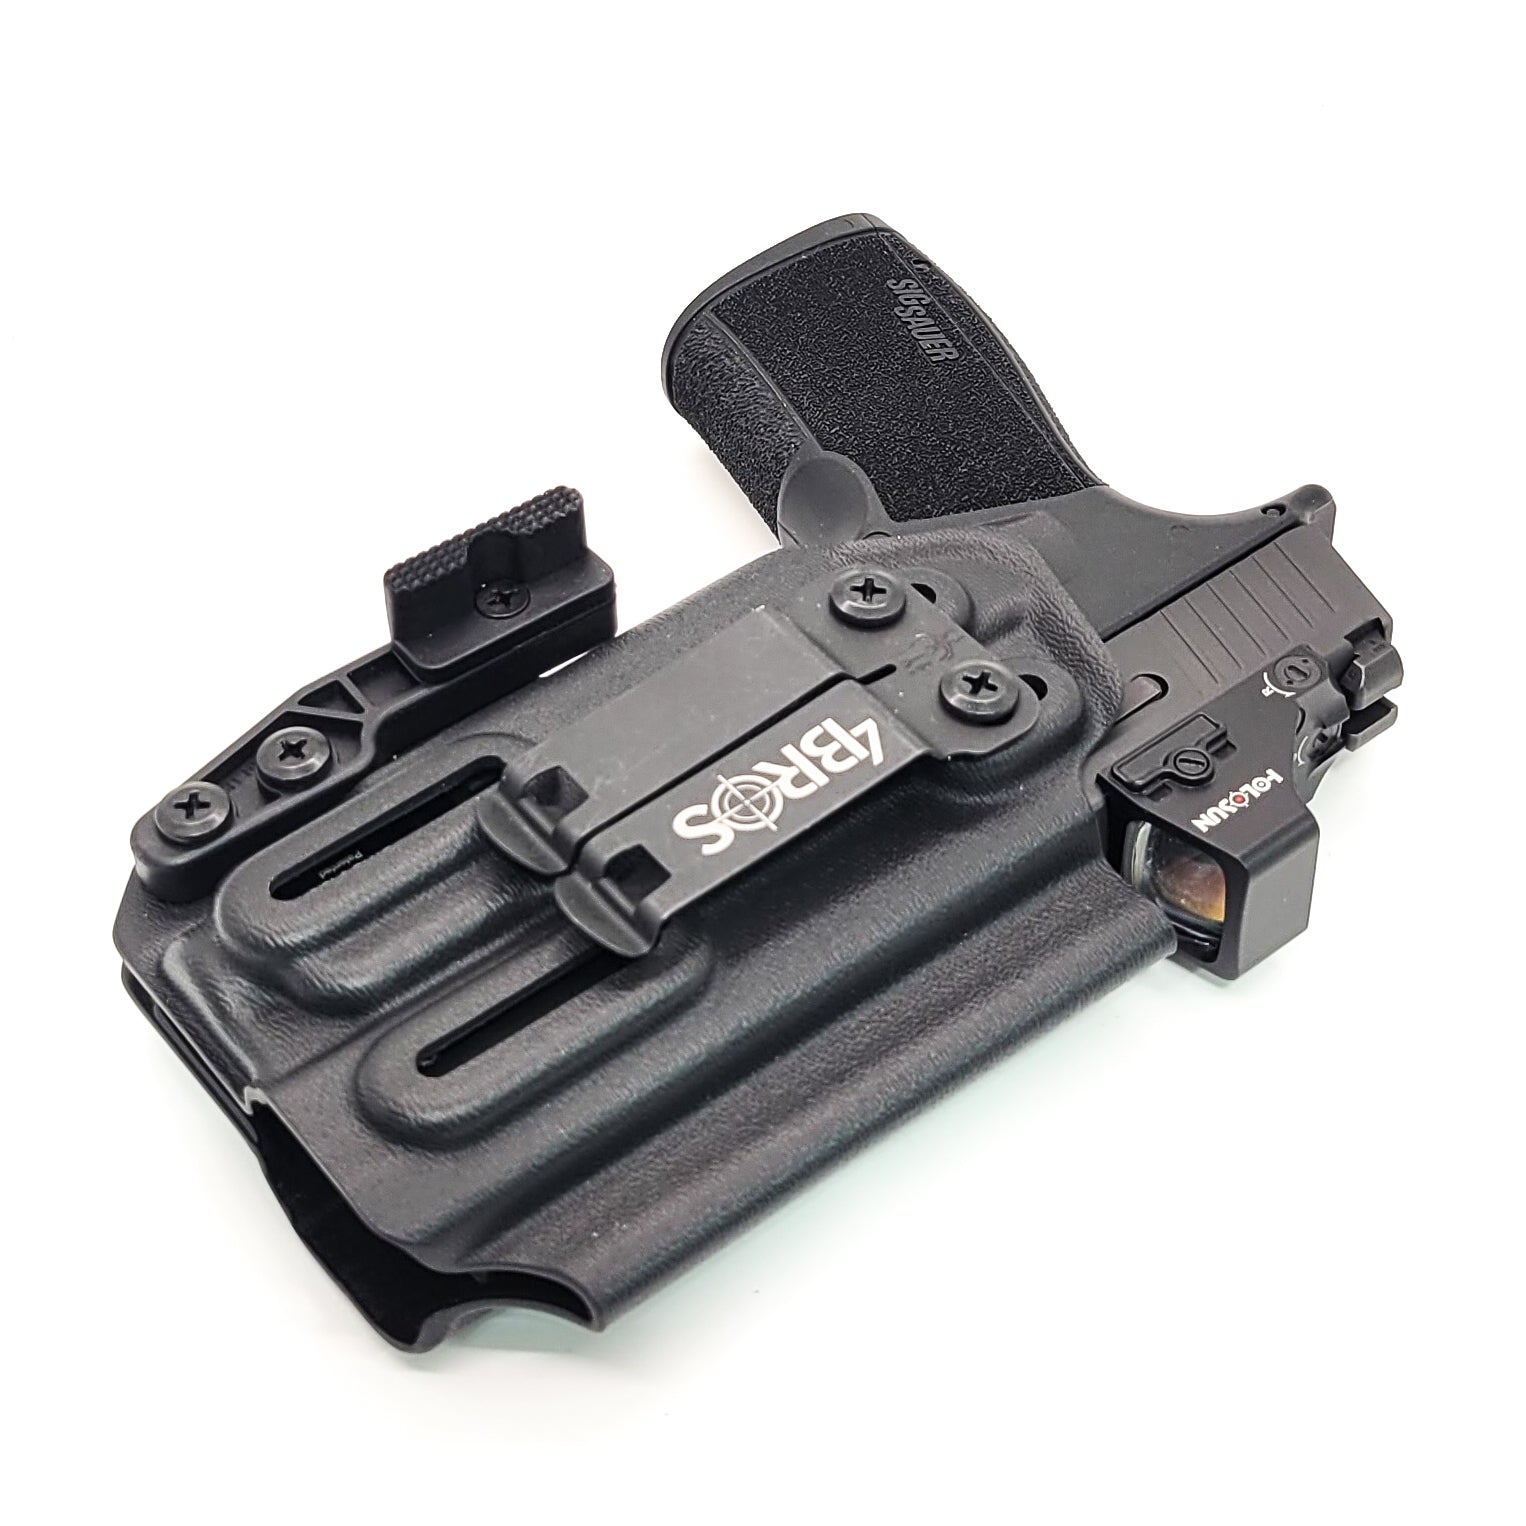 For the best, most comfortable, IWB AIWB Inside Waistband Kydex Holster designed to fit the Sig Sauer P365-XMACRO COMP with Streamlight TLR-7 or TLR-7A, shop Four Brothers Holsters.  Full sweat guard, adjustable retention. Made in the USA. Open muzzle for threaded barrels, cleared for red dot sights.